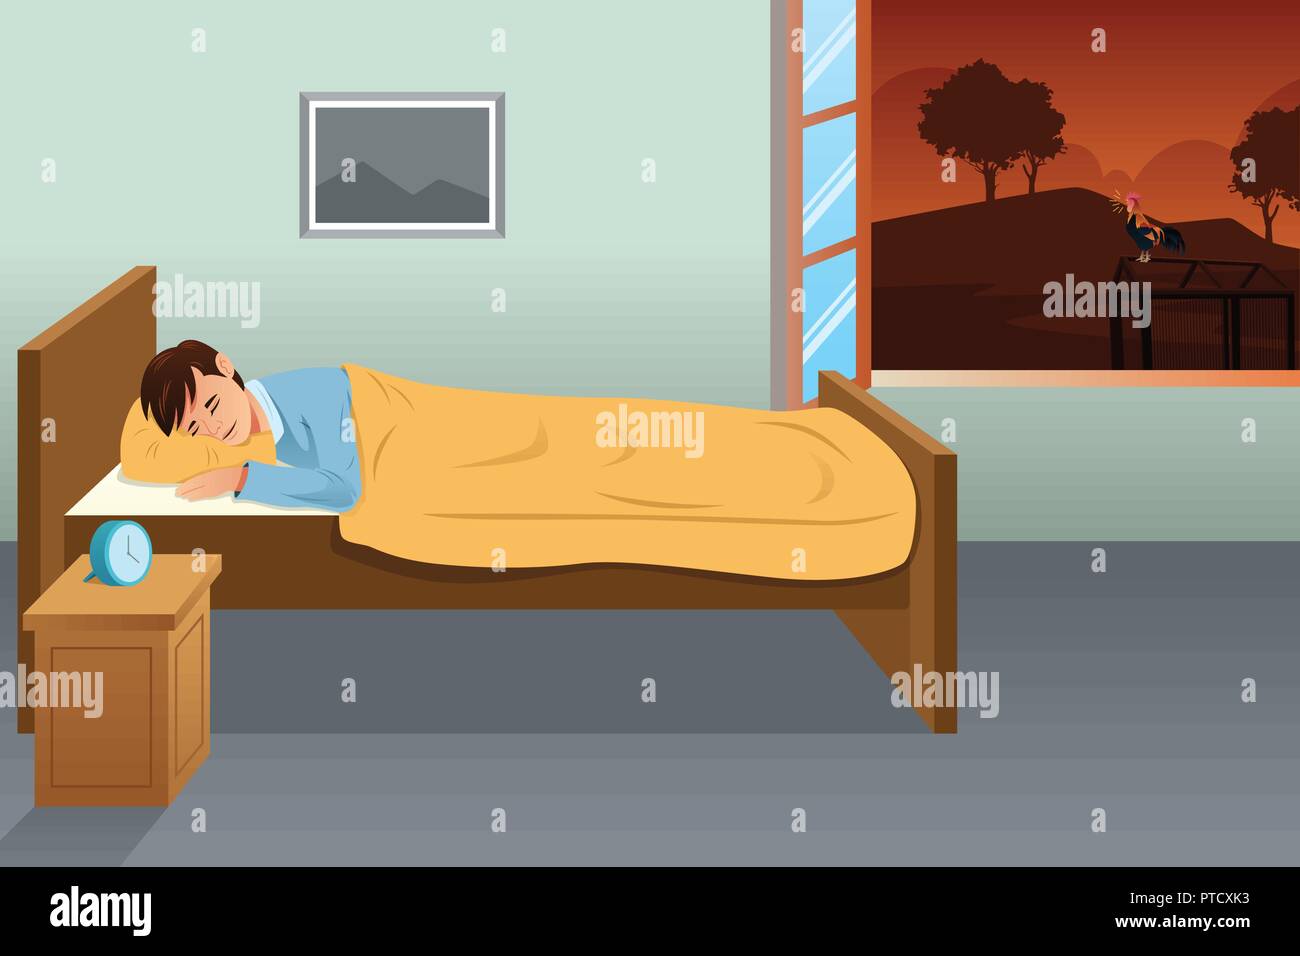 A vector illustration of Sleeping Man With Rooster Calling Stock Vector